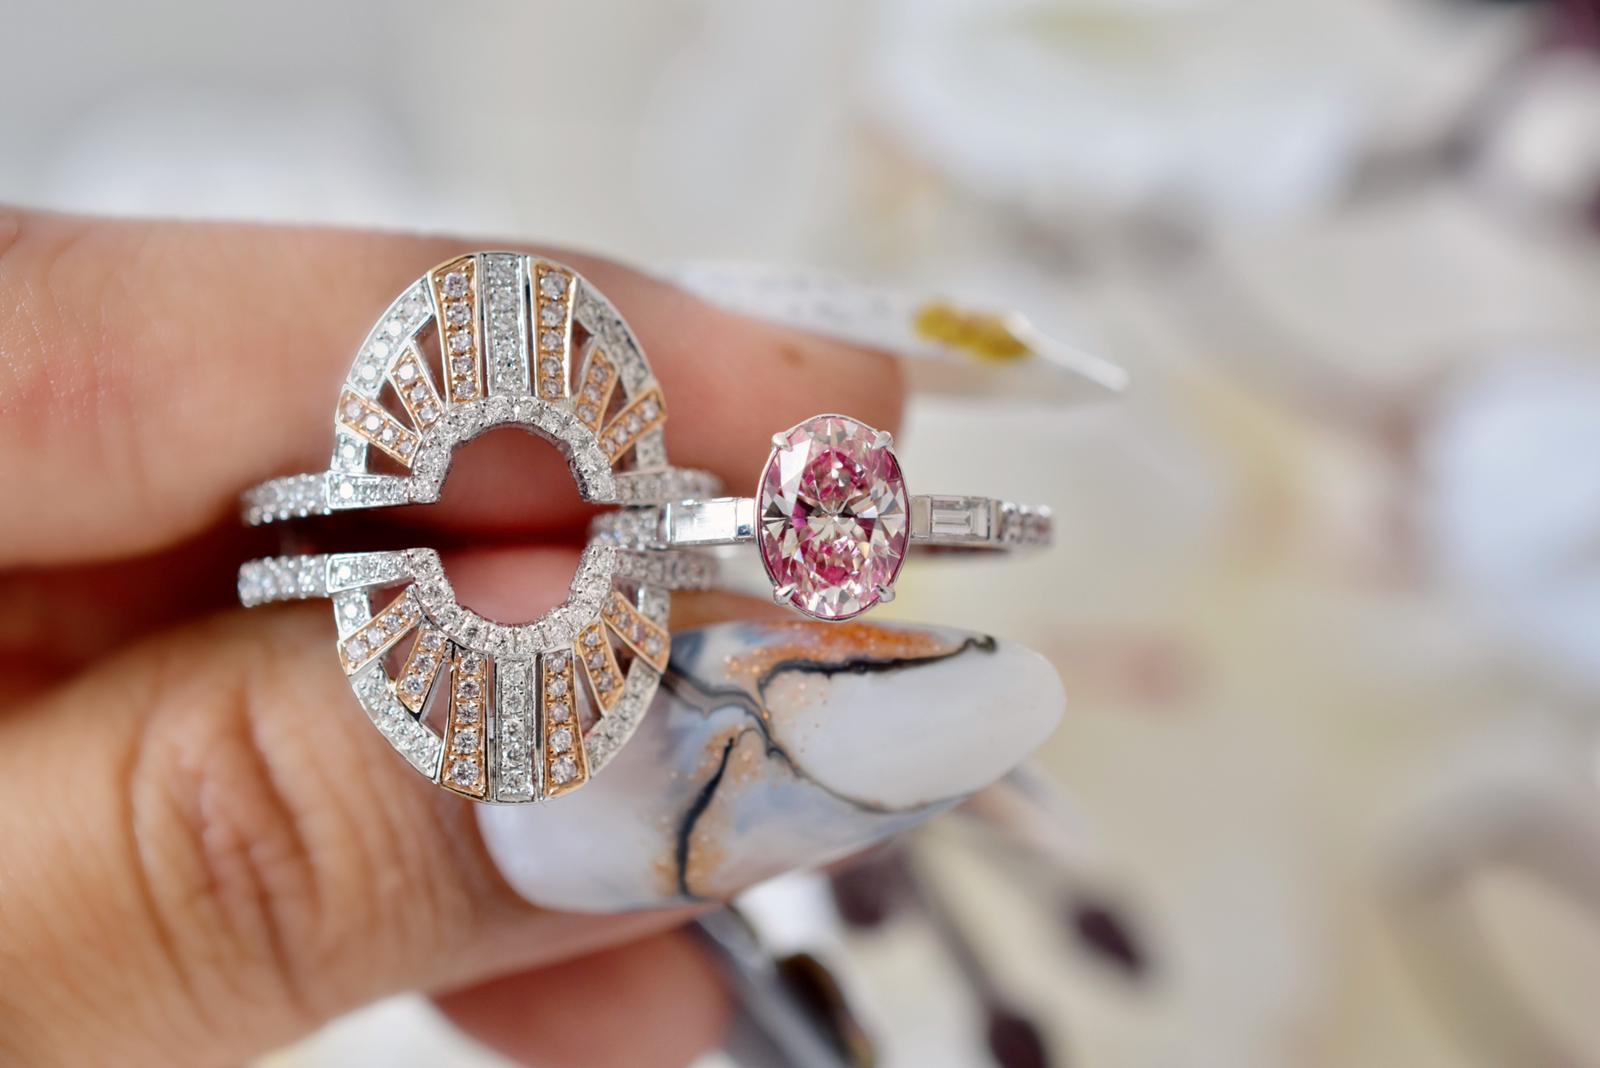 AGL Certified 1.01 Carat Fancy Pink Diamond Ring VS Clarity For Sale 3